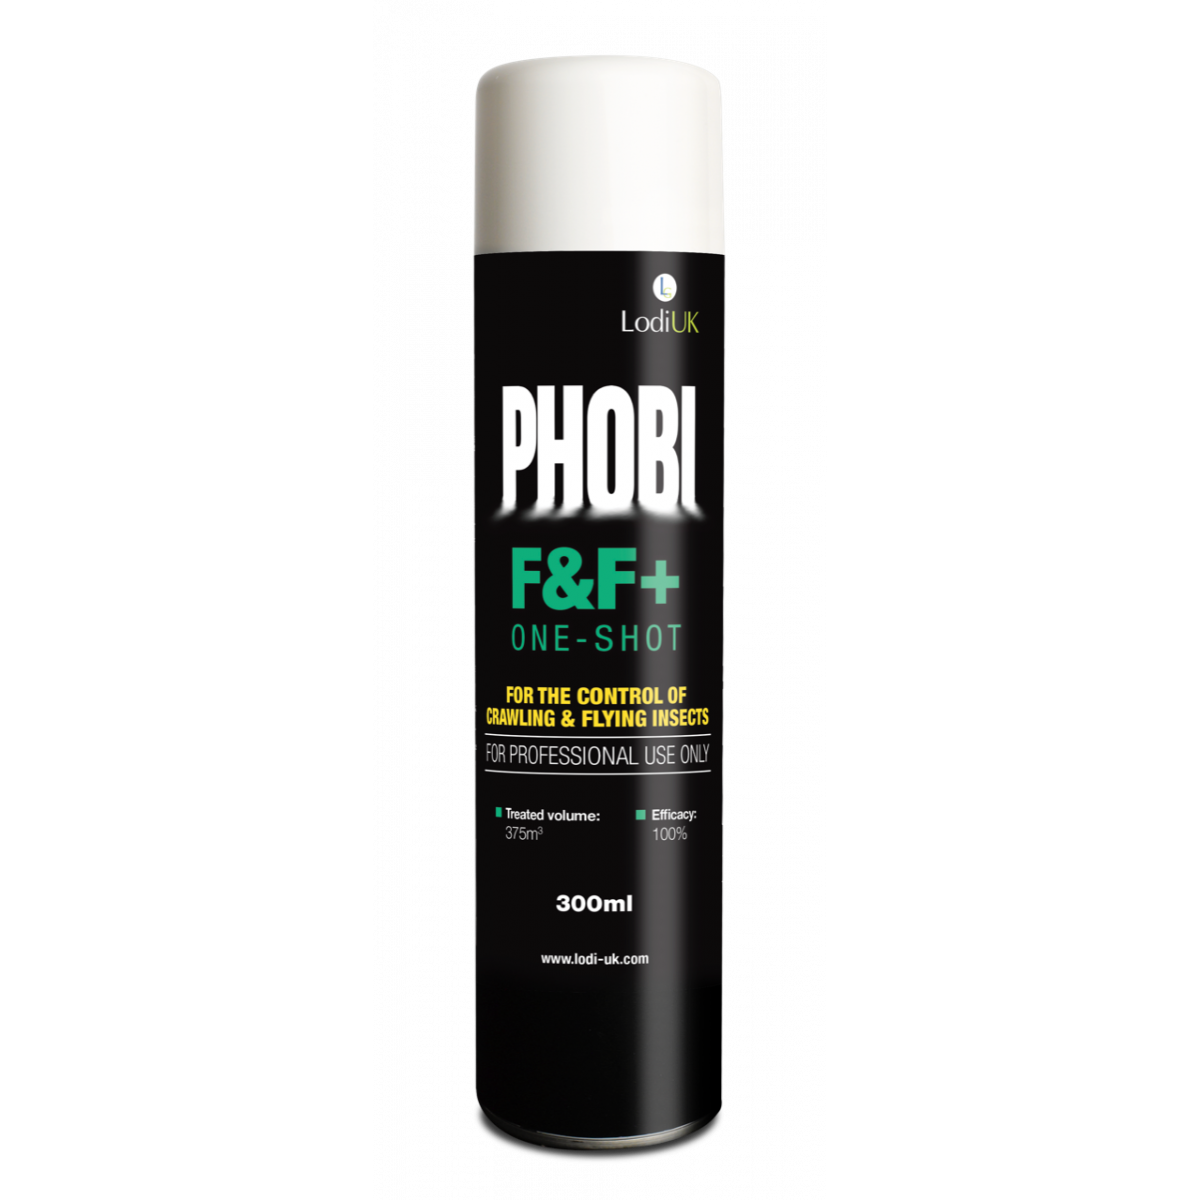 Phobi F&F One-Shot Flying & Crawling Insect Killer for Professional Use